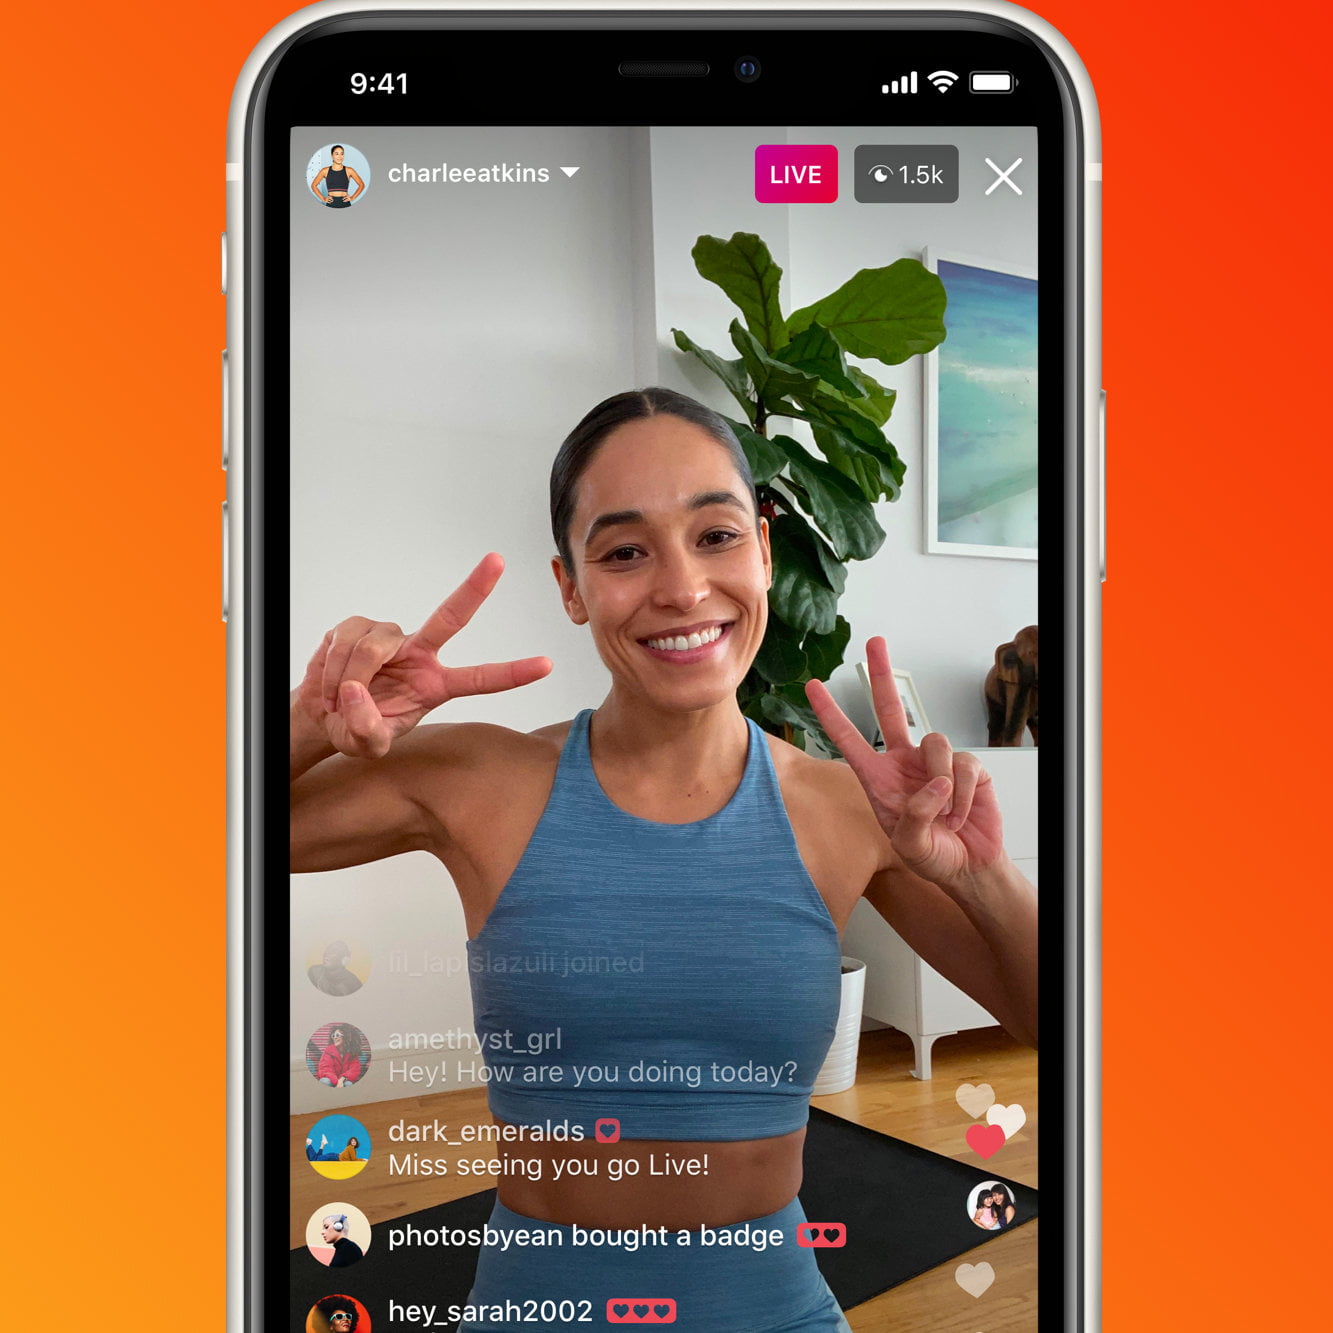 How to download live videos from Instagram?